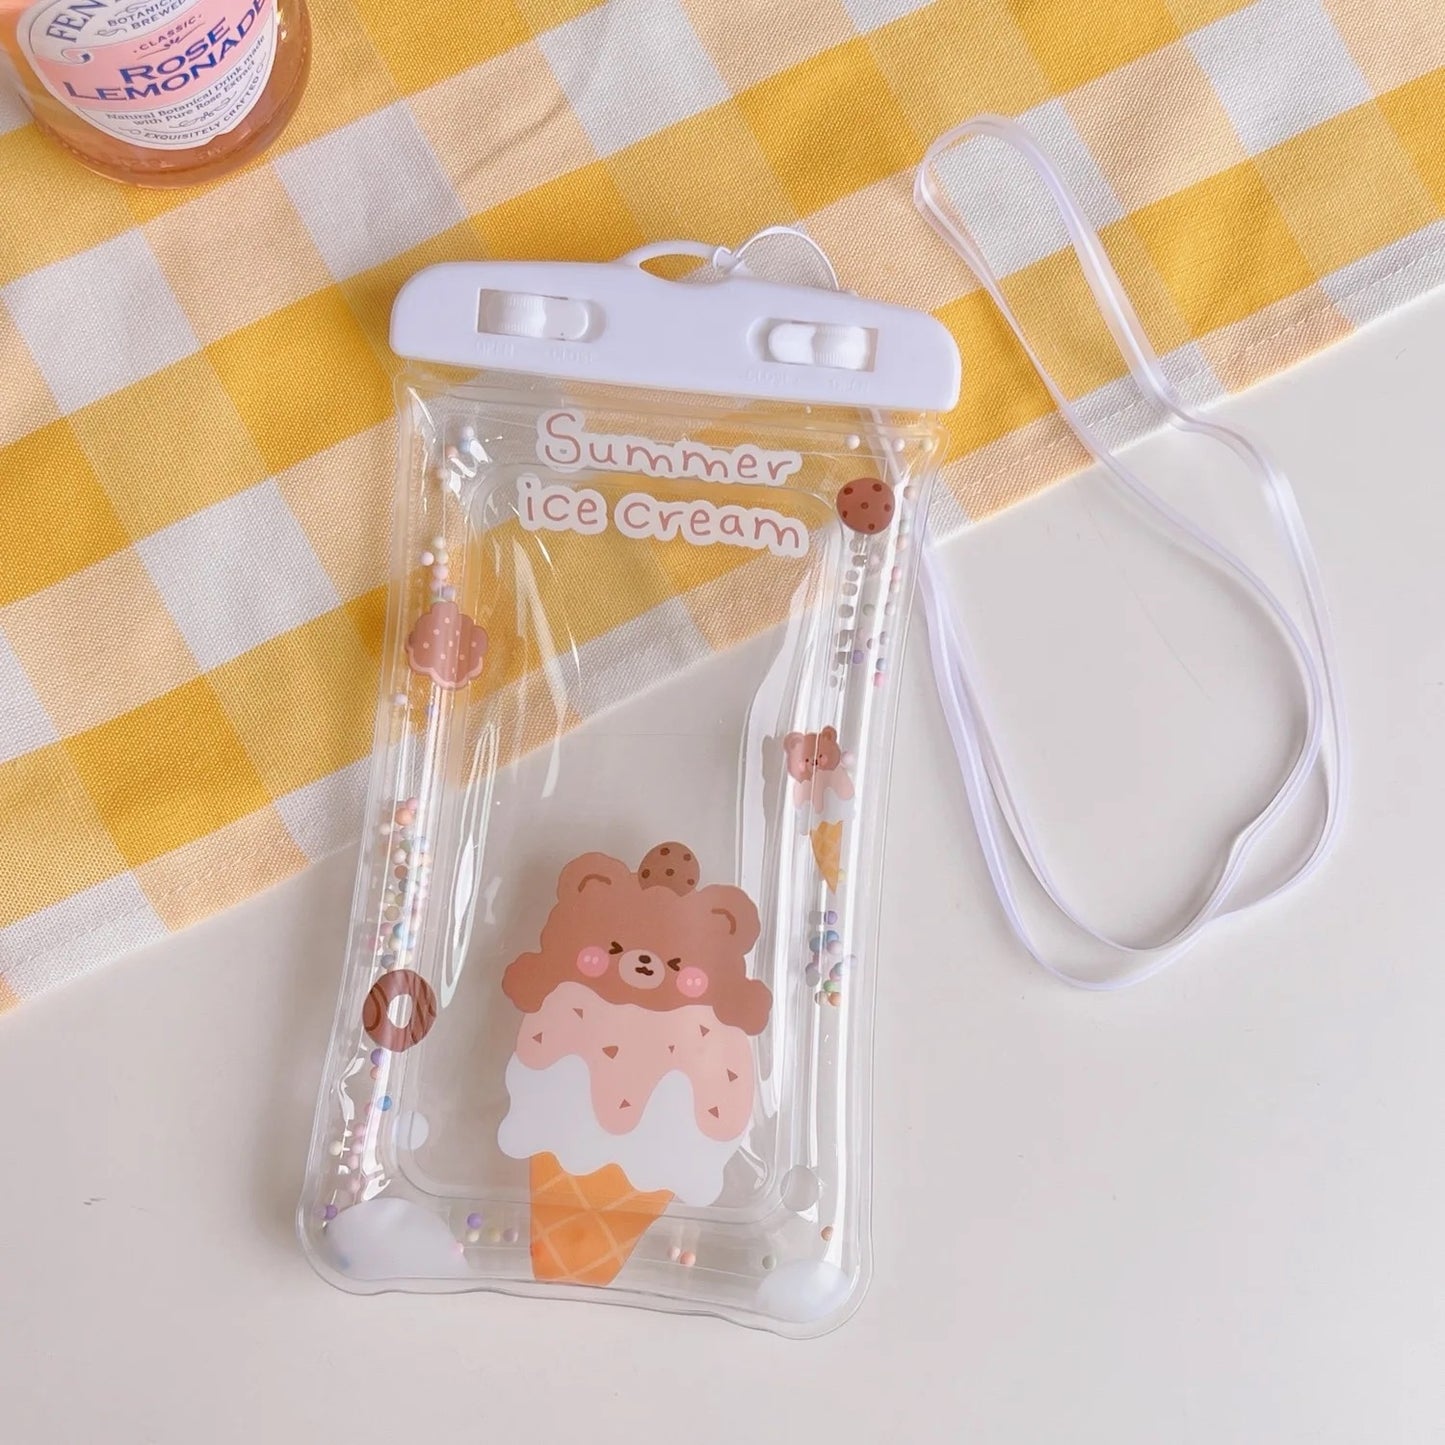 Kawaii mobile water proof pouch